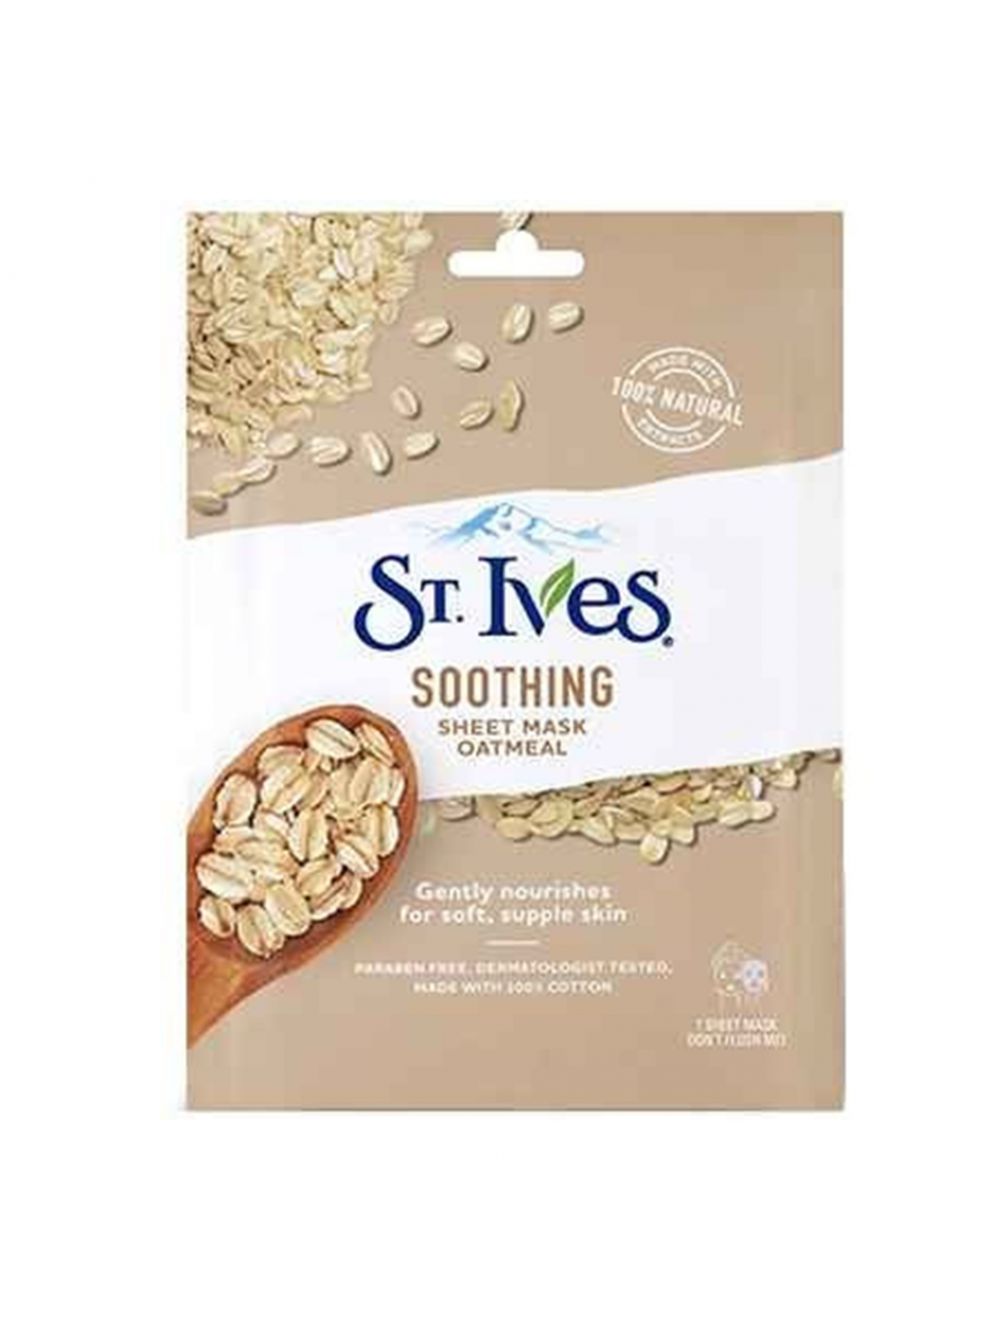 St. Ives Oatmeal Soothing Mask Sheet (1Pc)